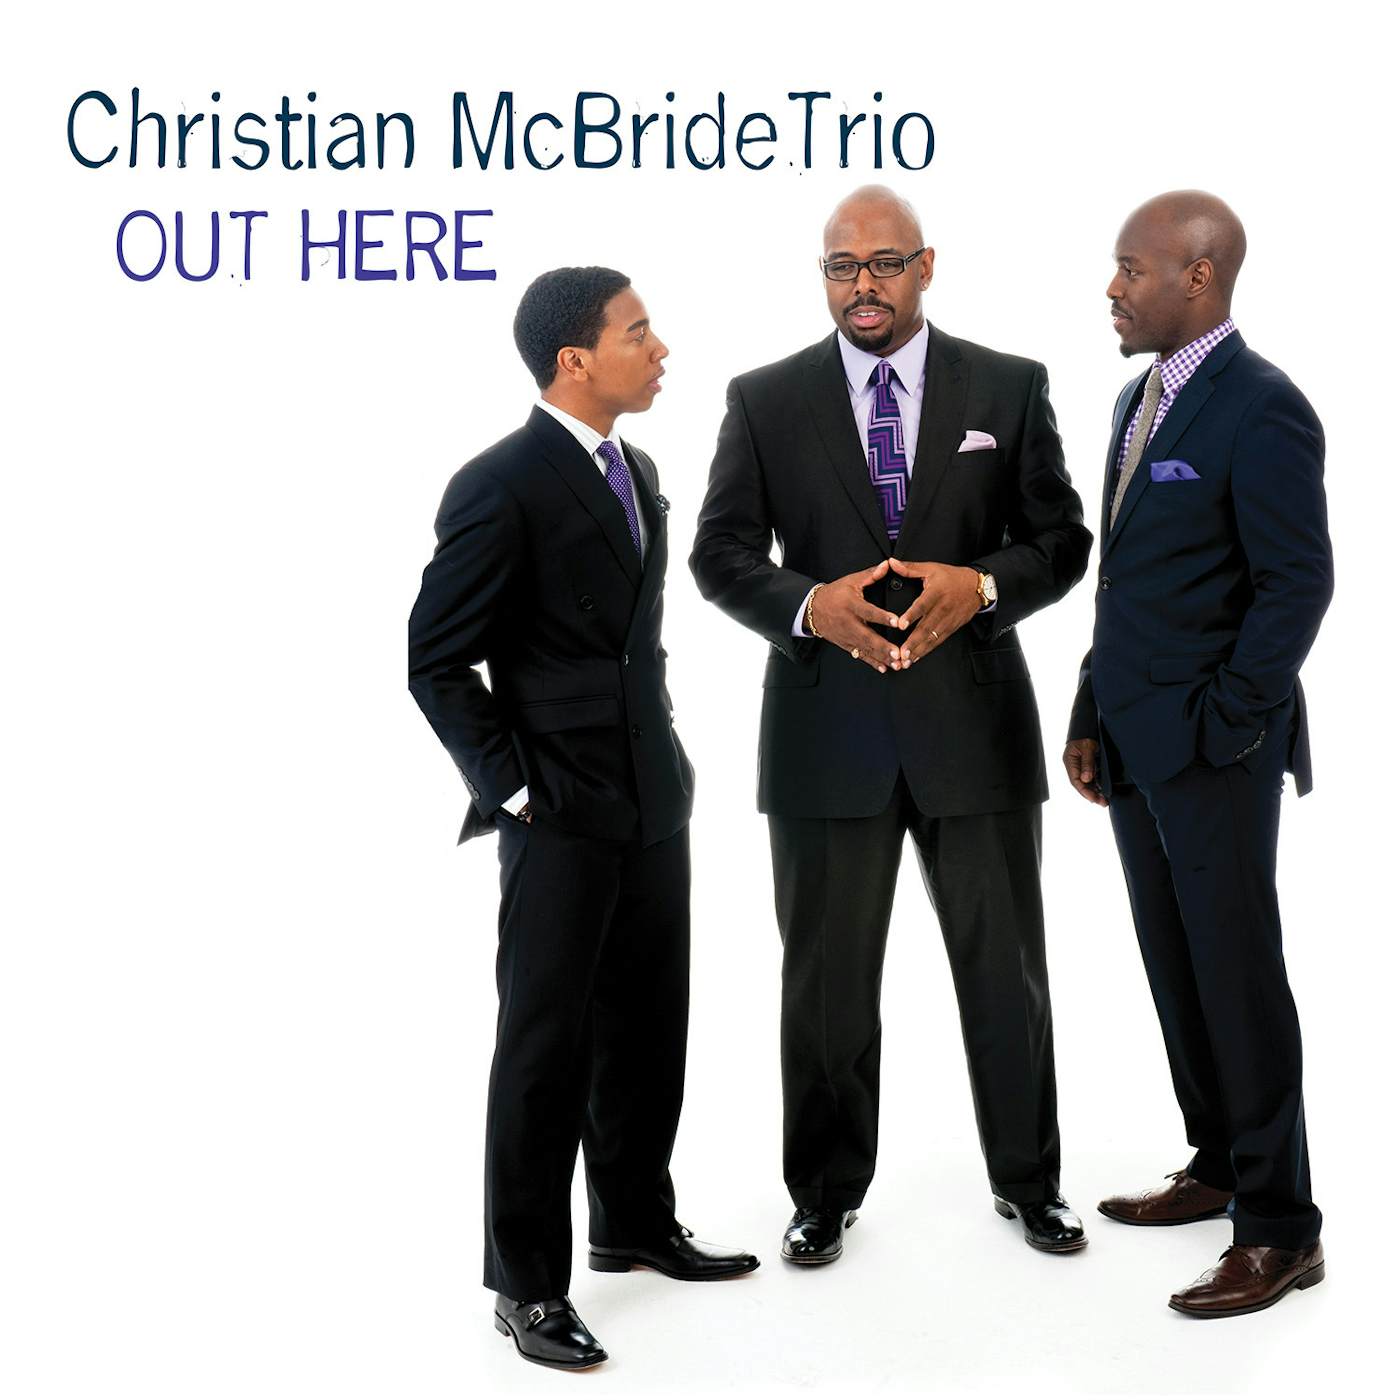 Christian McBride OUT HERE CD